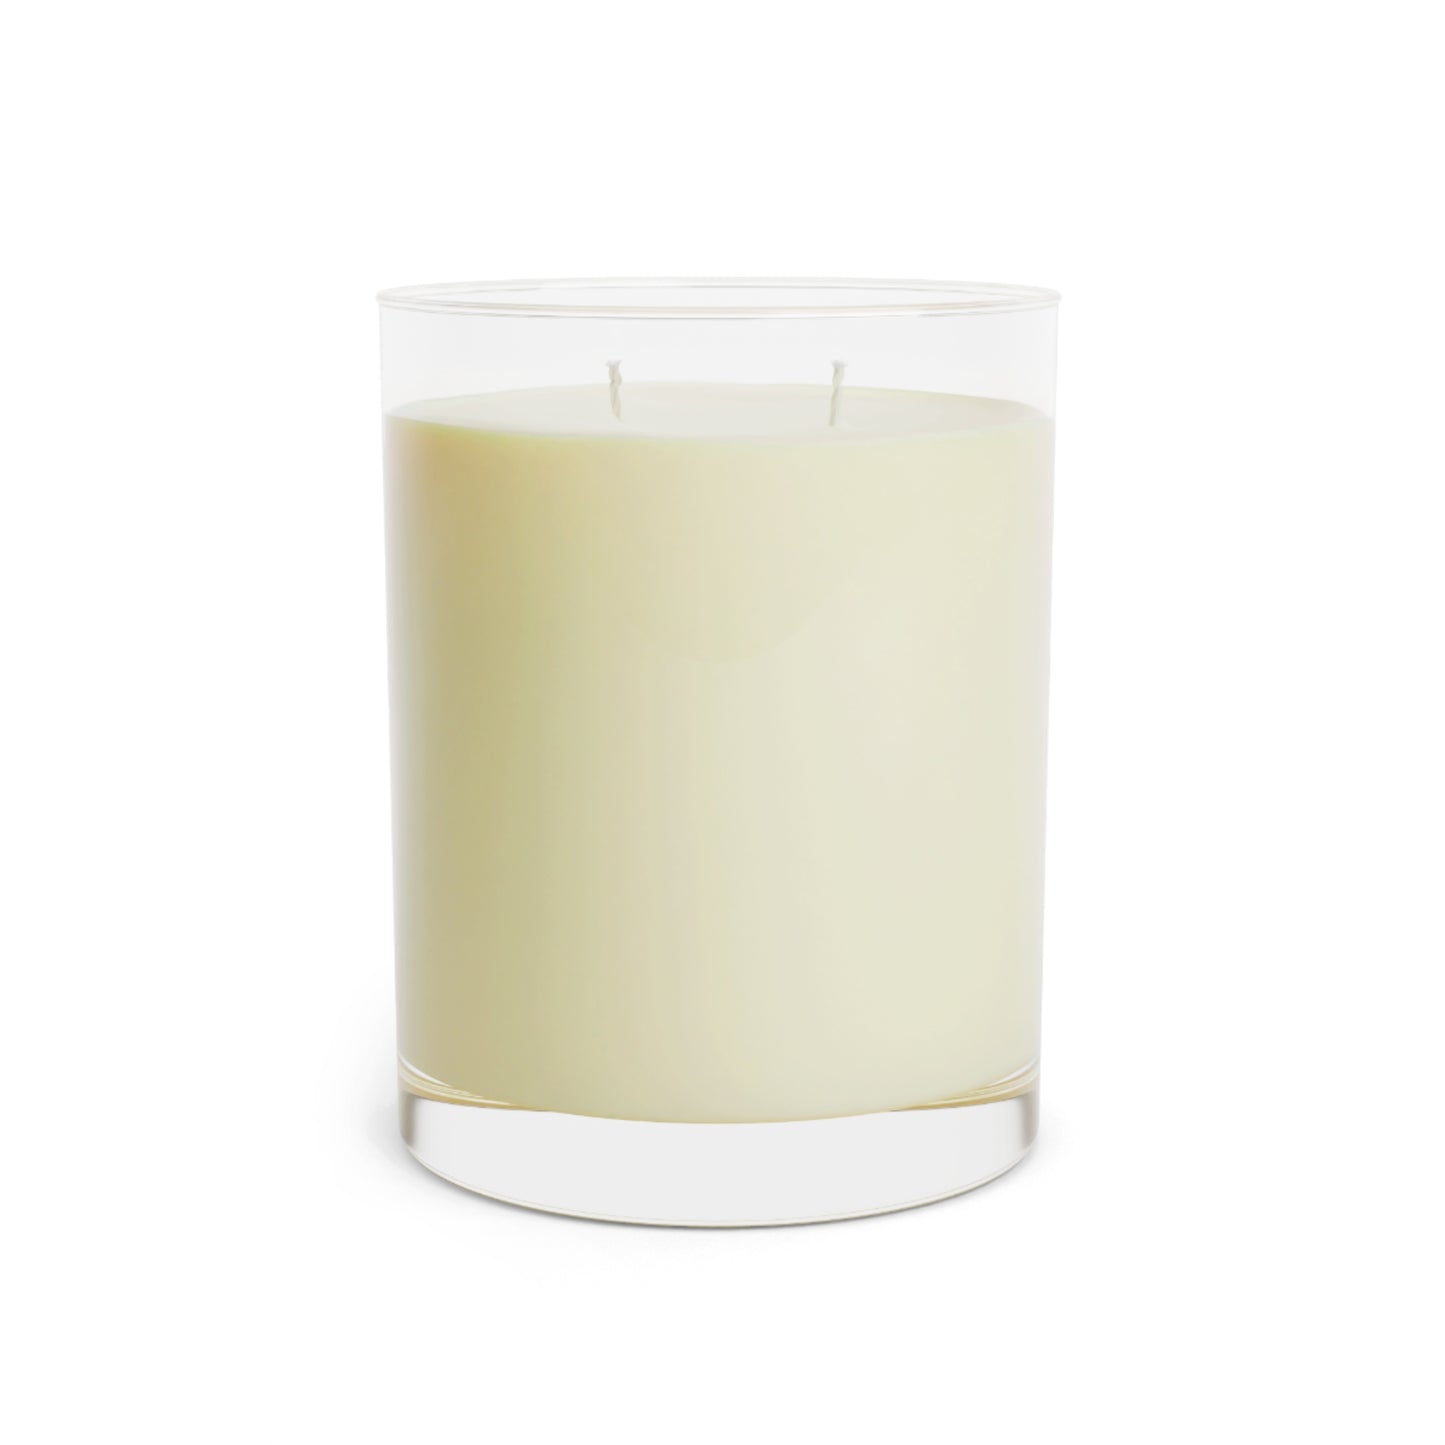 Heart Cross Scented Candle - Full Glass, 11oz